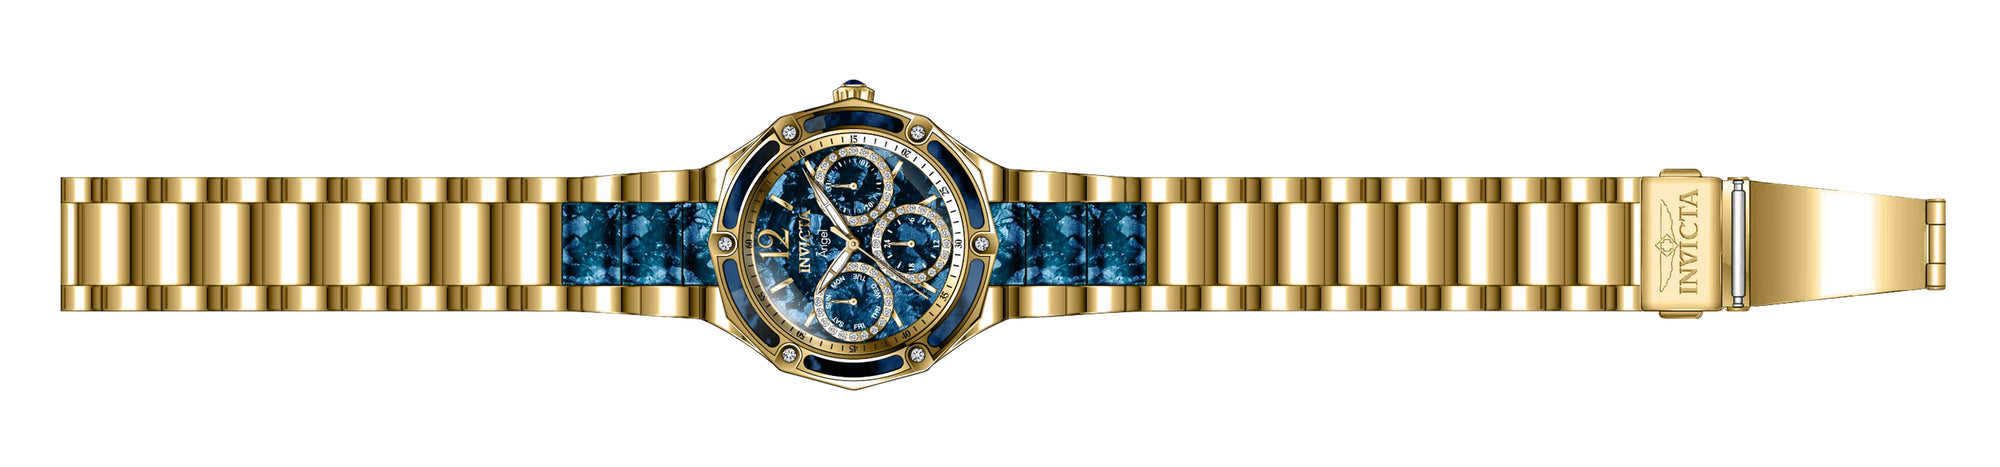 Band for Invicta Angel Lady 40391